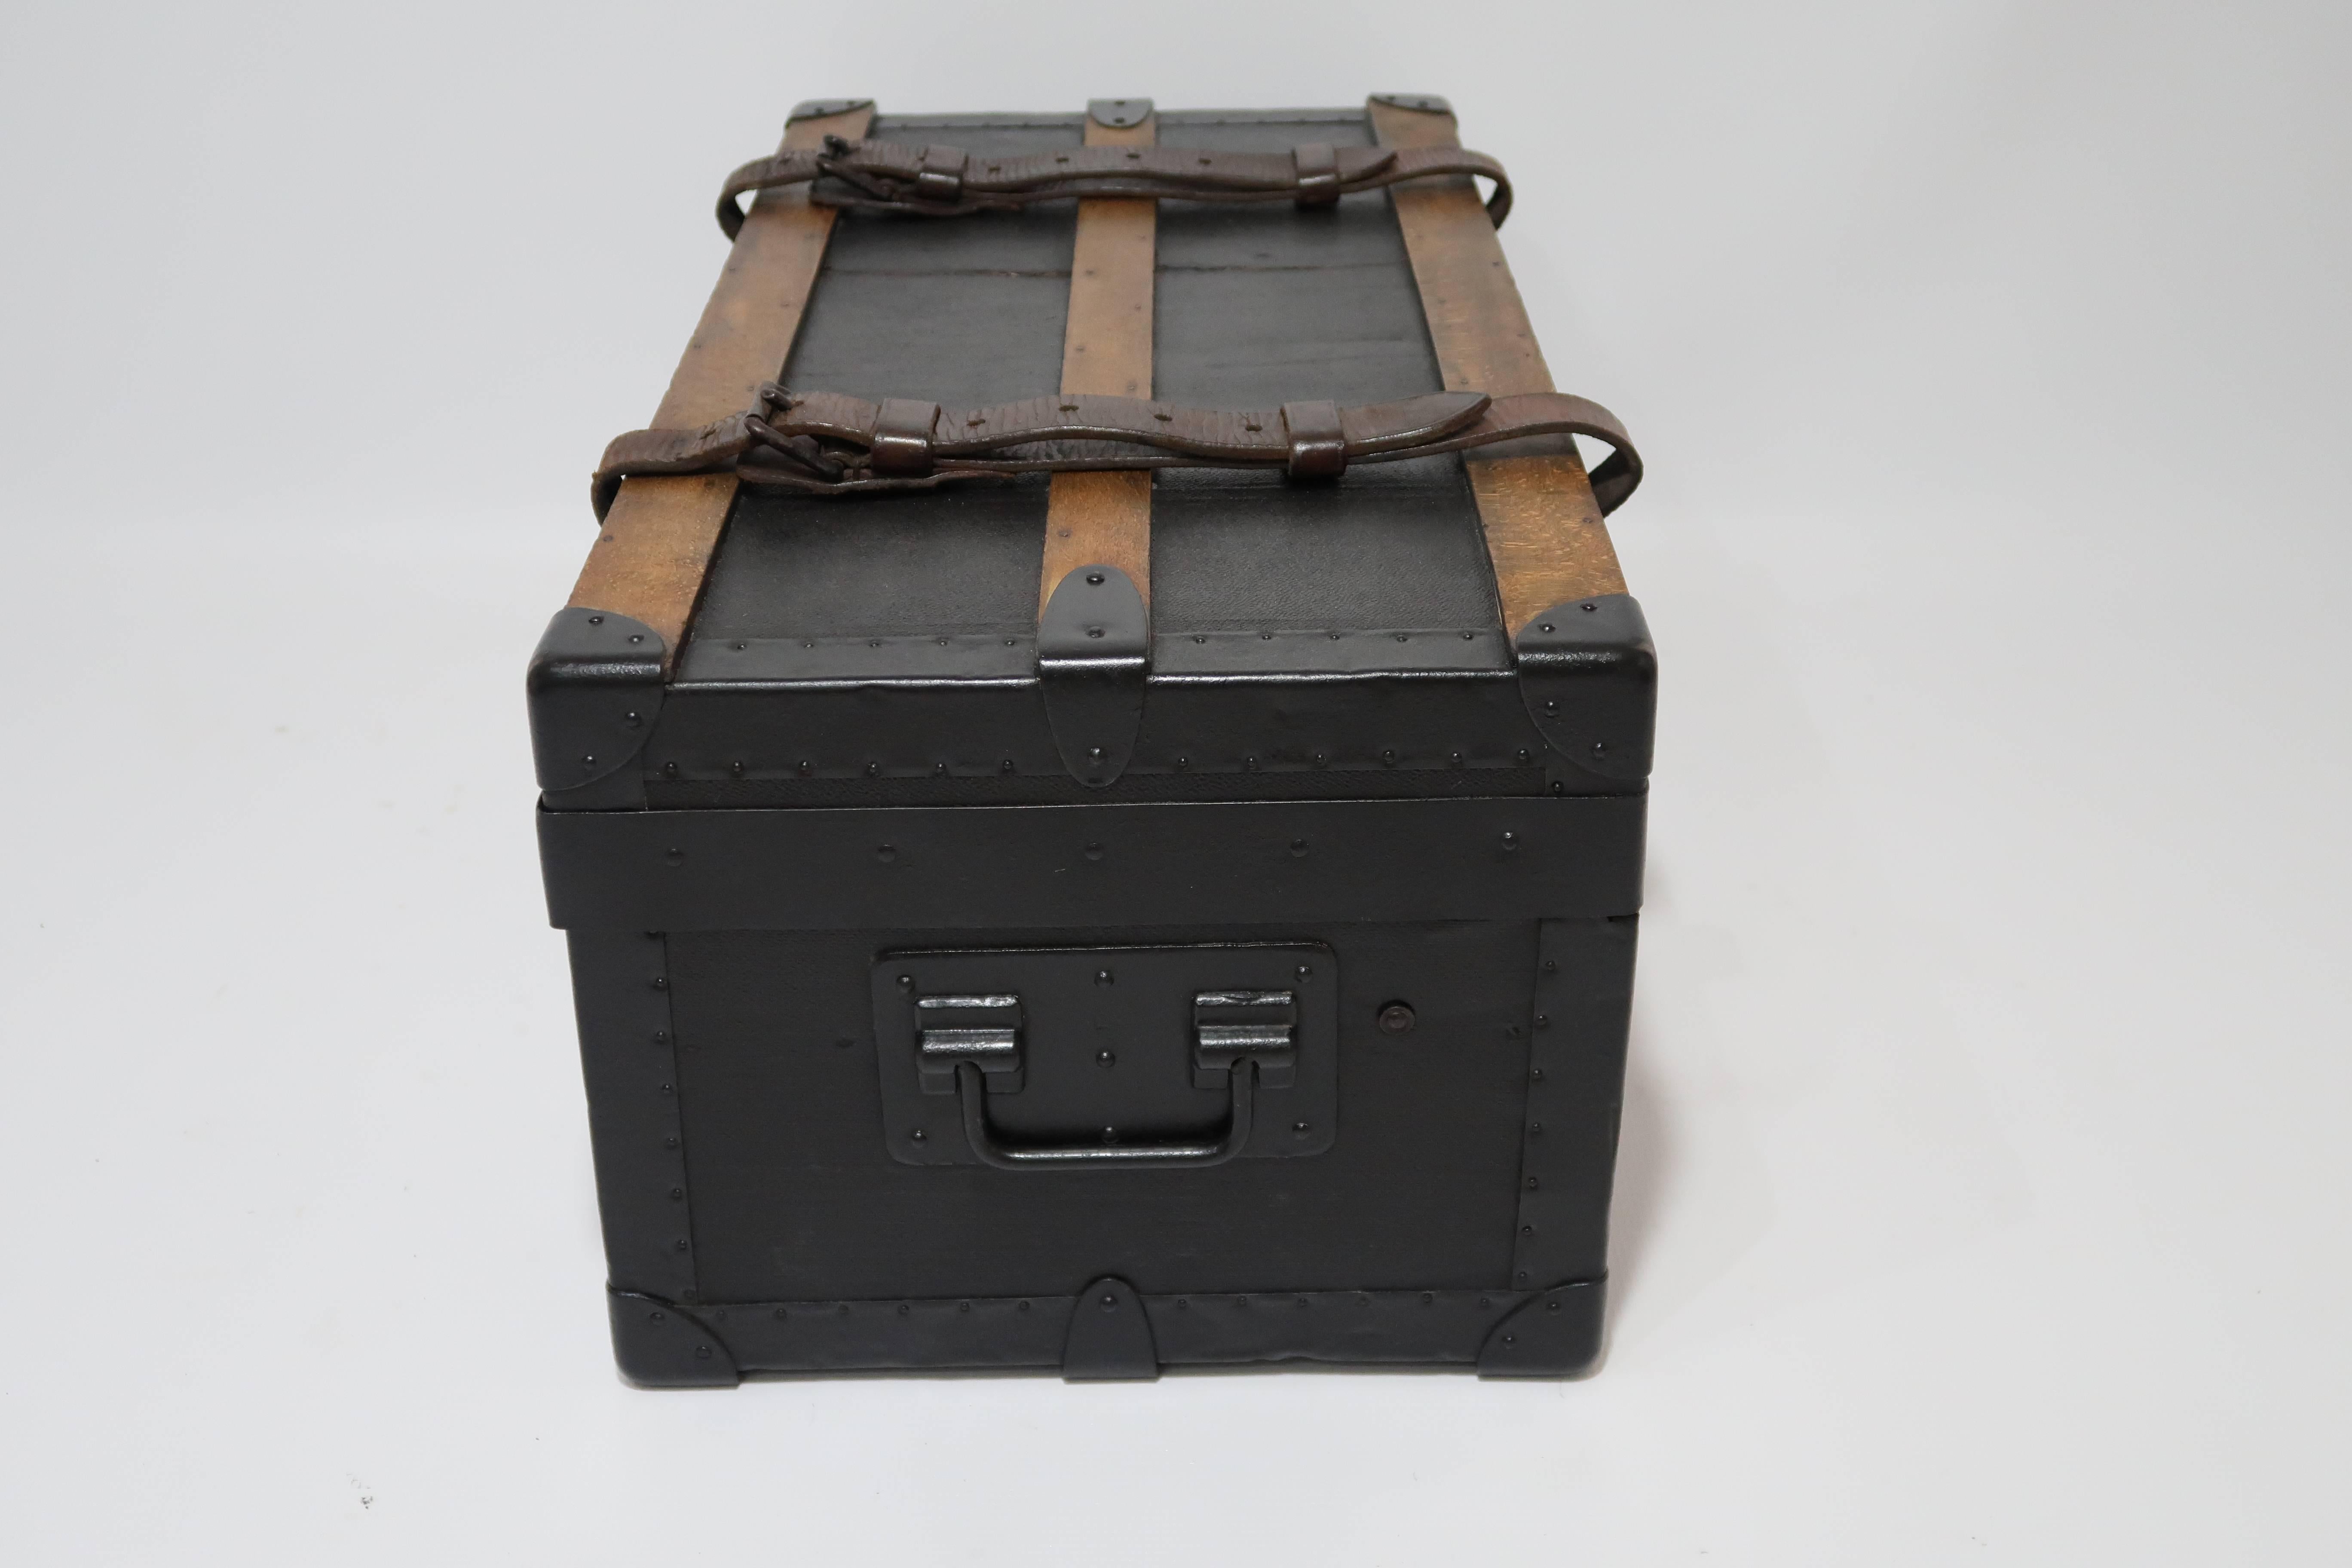 Antique Louis Vuitton army trunk from World War I, belonged to Sous-Lieutenant Caillaux of the French army.

Rare piece of history, in very good condition with a very thick black canvas, wooden slats and leather straps on the top of the